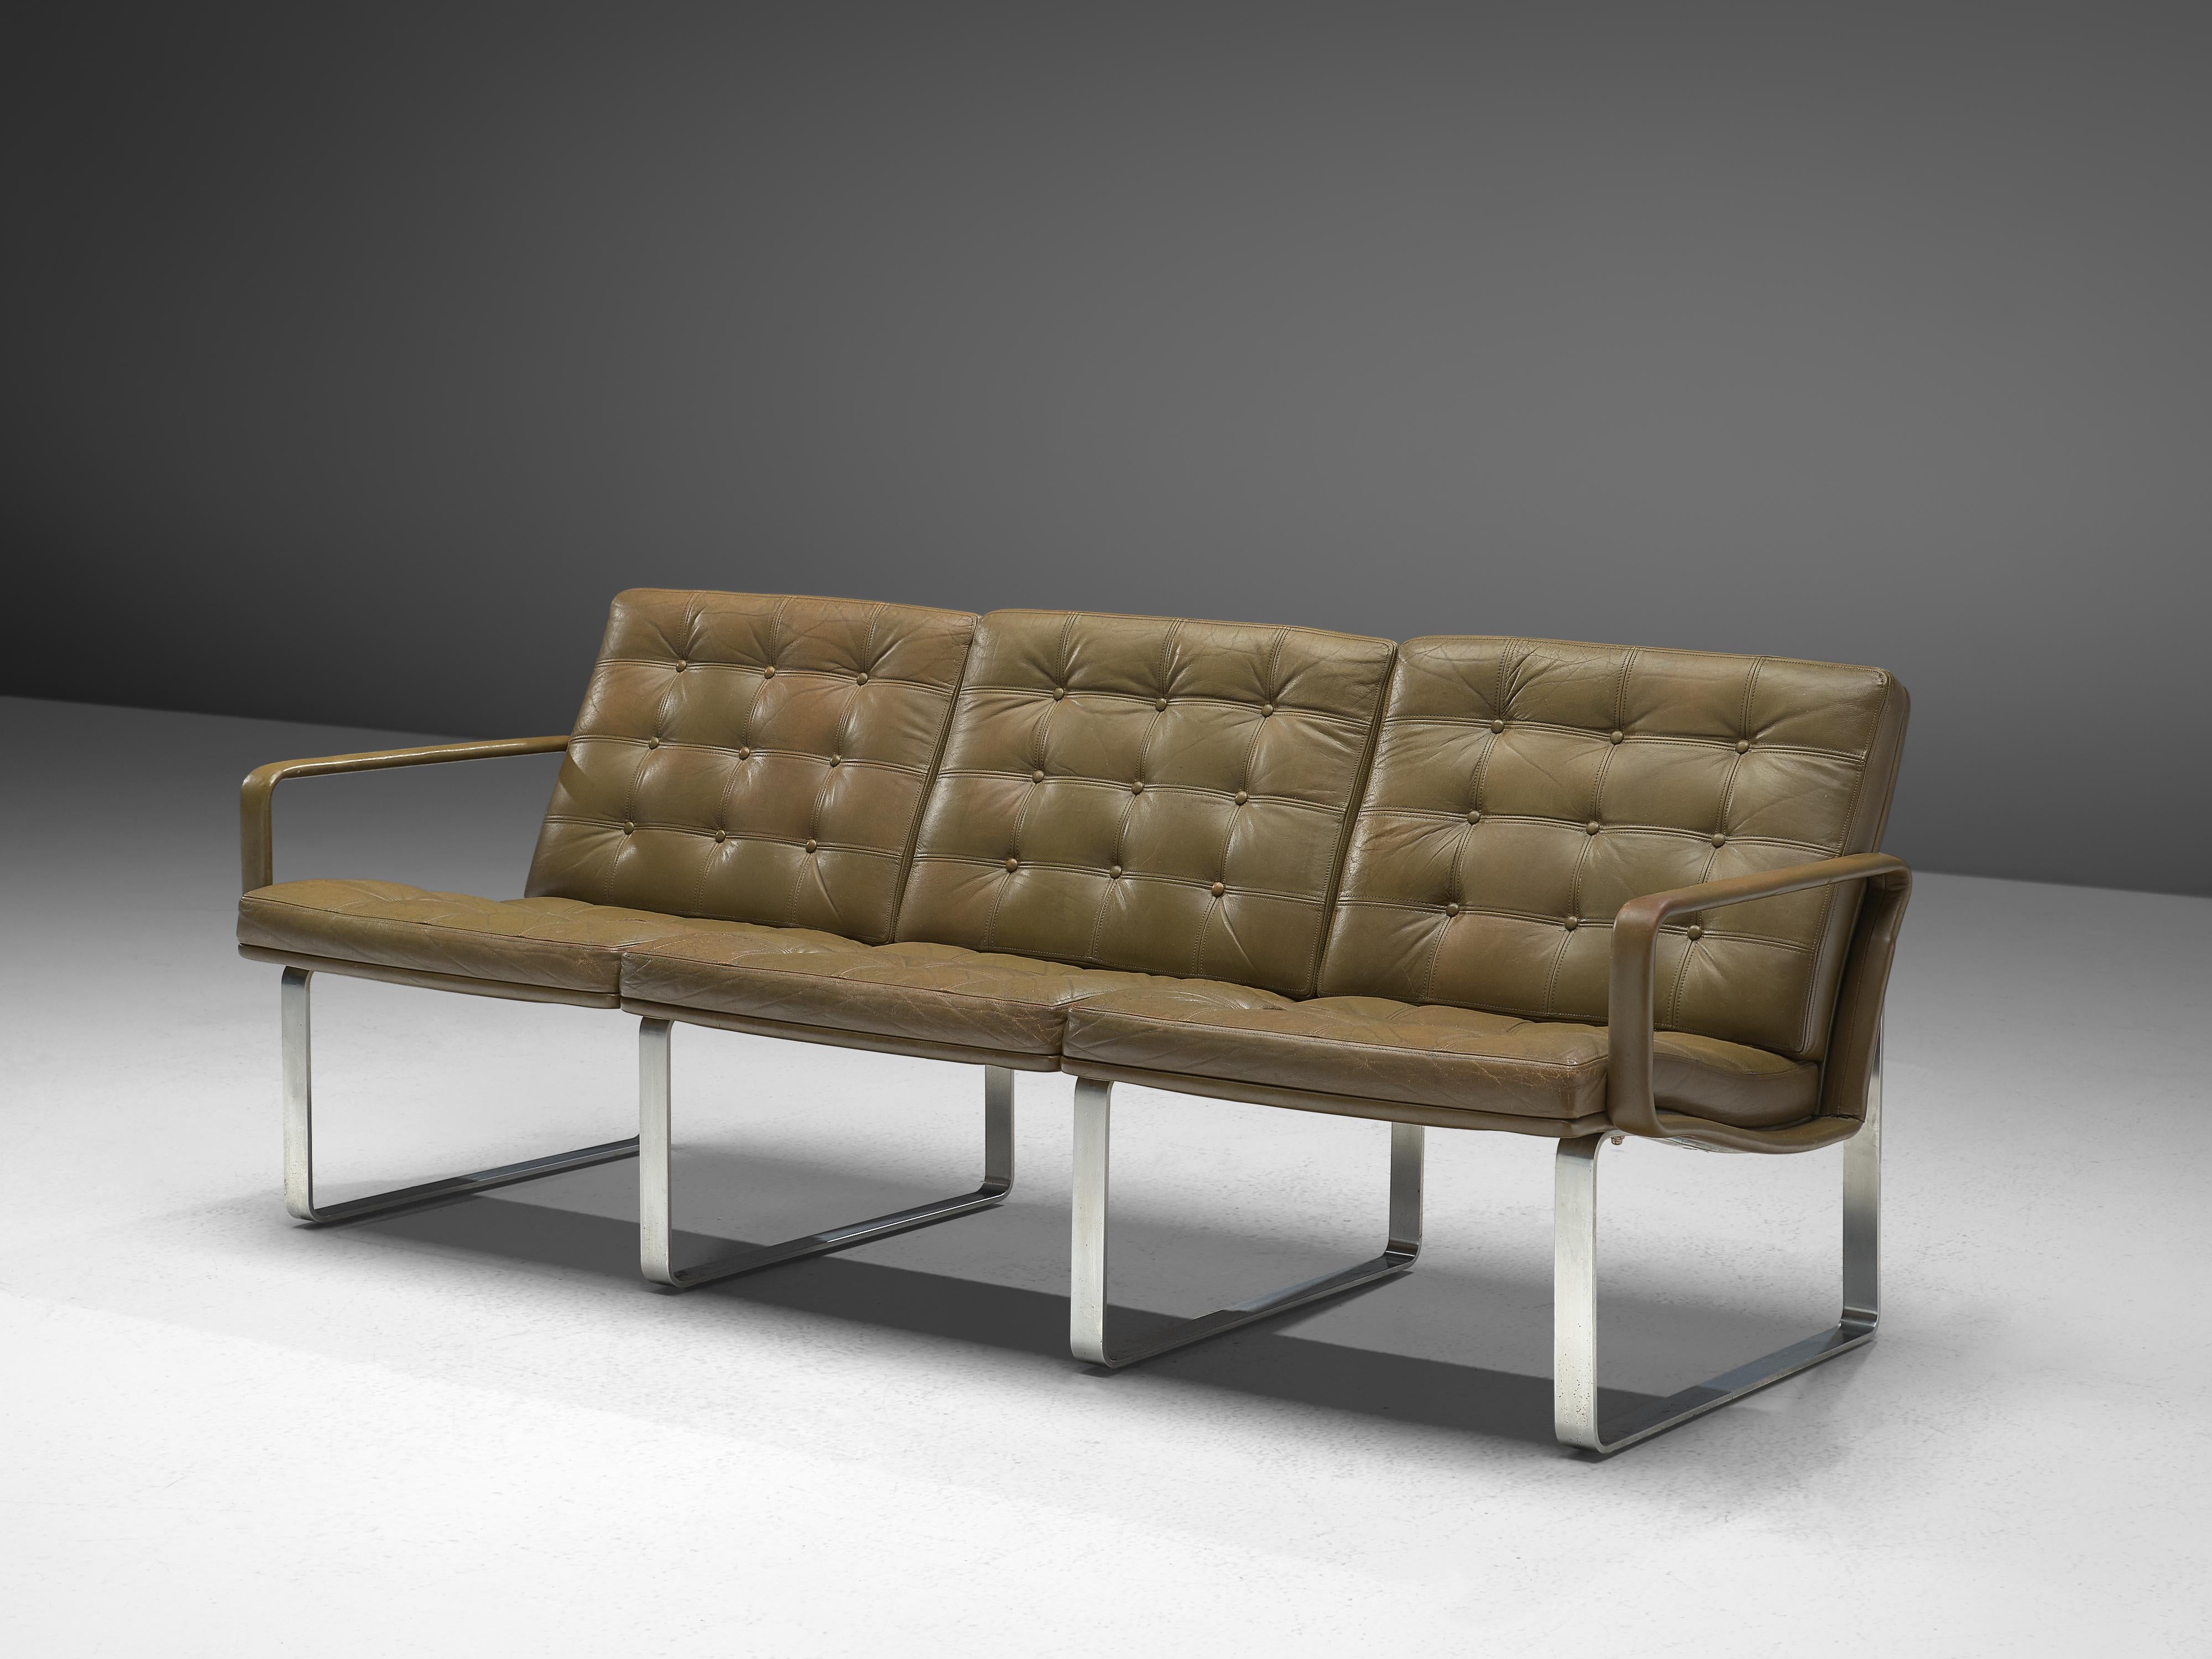 Ole Gjerløv-Knudsen & Torben Lind for France & Søn, three-seat sofa, chromed steel, leather, Denmark, 1962 

Modern and beautiful colored modular sofa, designed by Ole Gjerløv-Knudsen & Torben Lind as part of the Moduline series in 1961. The steel